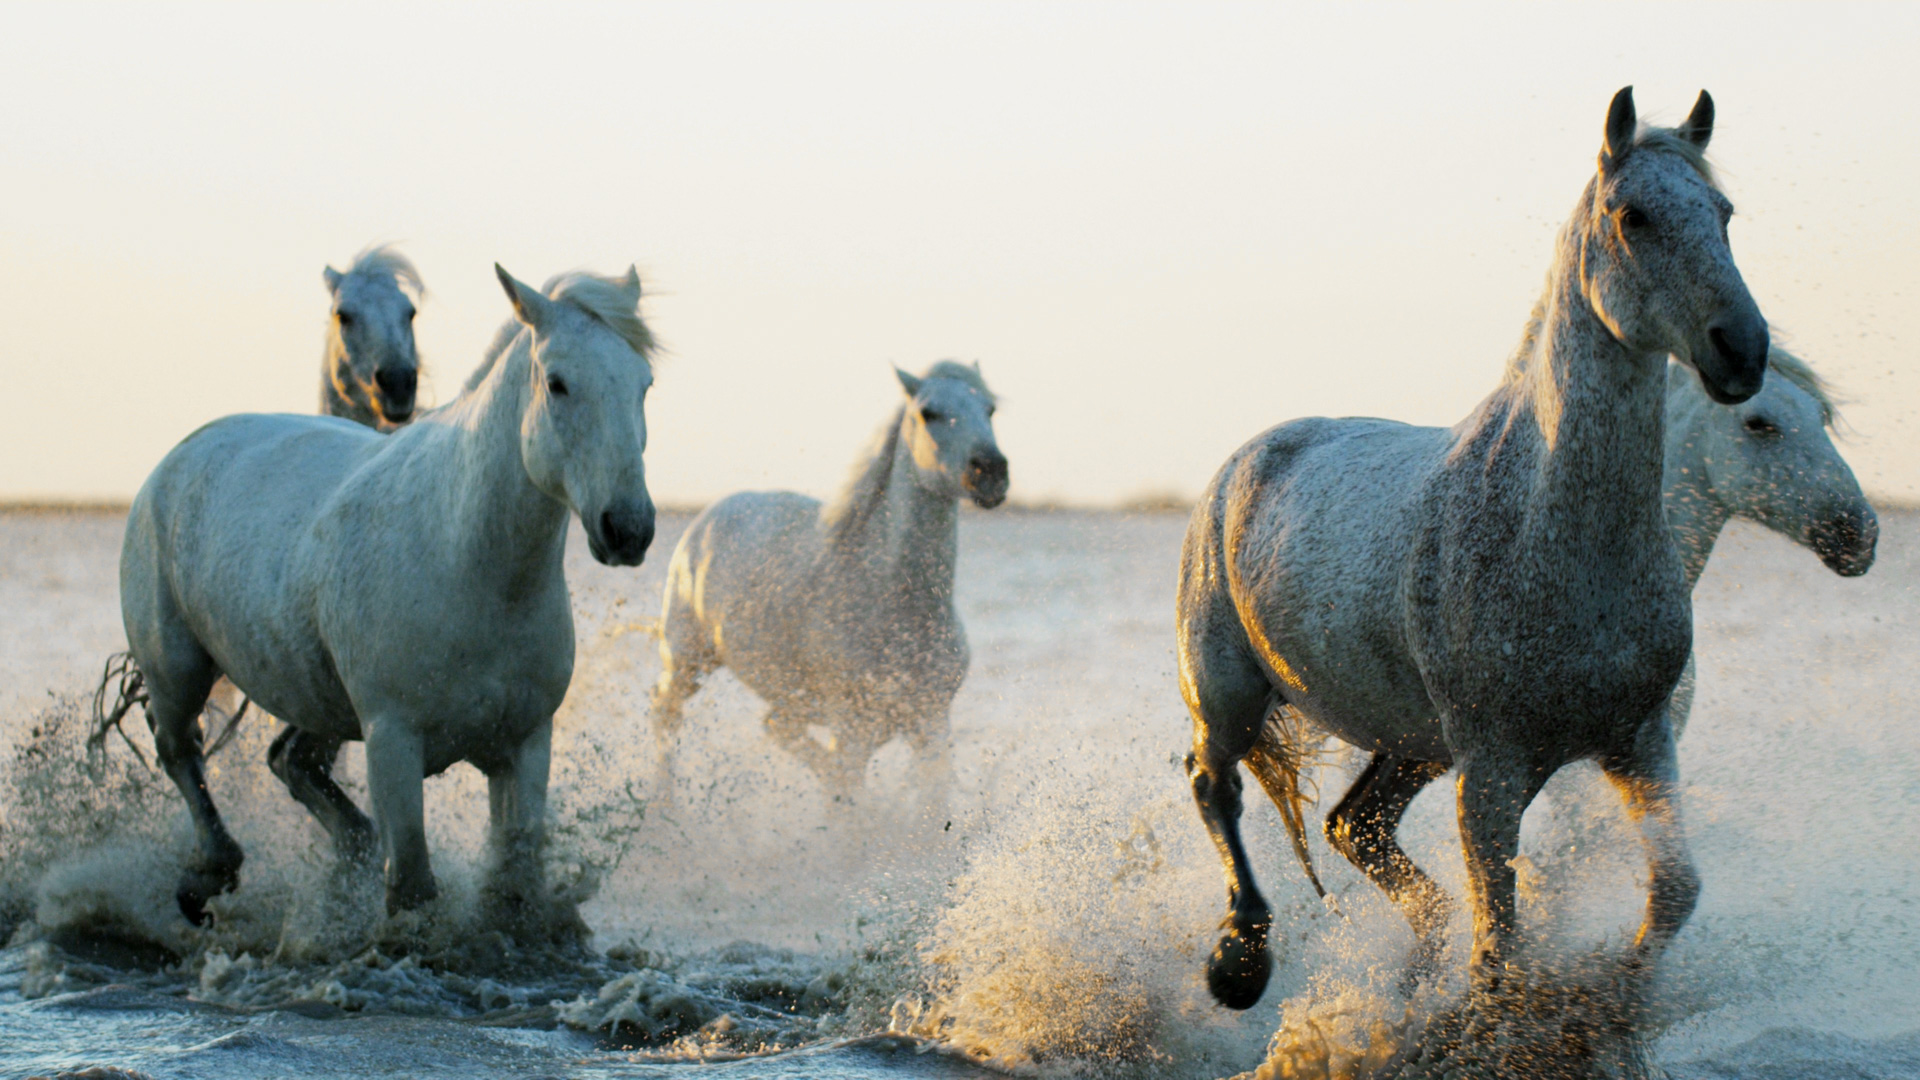 Footage with a cleaner looking white balance featuring white horse running on a beach at sunrise